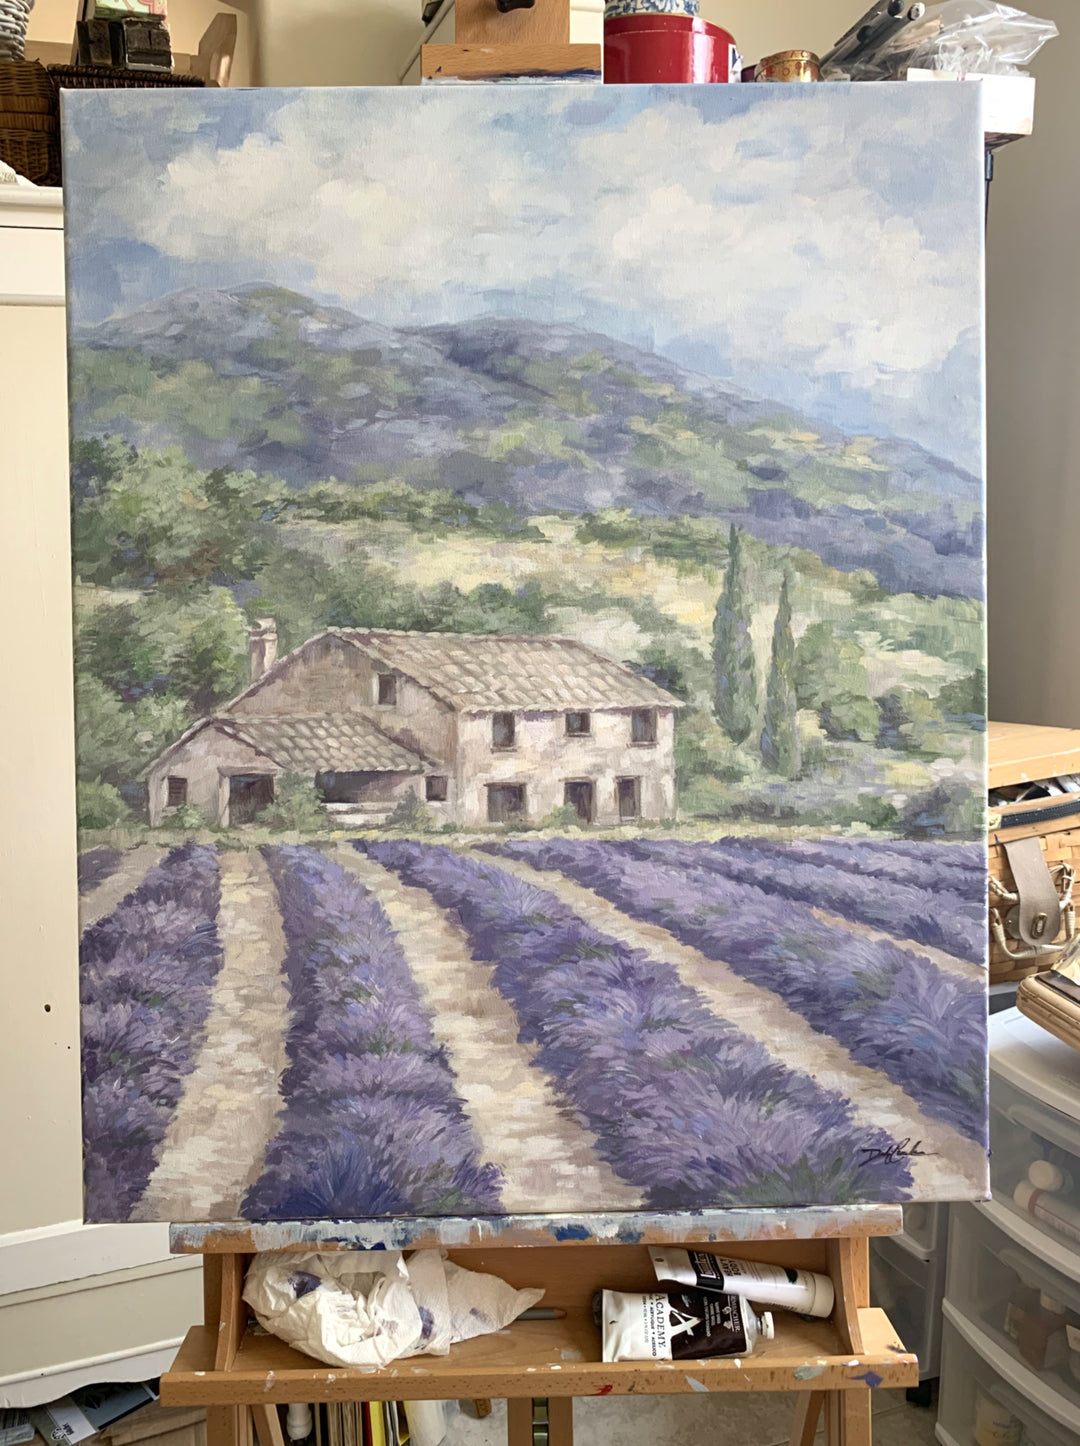 Lavender fields in France painted on commission